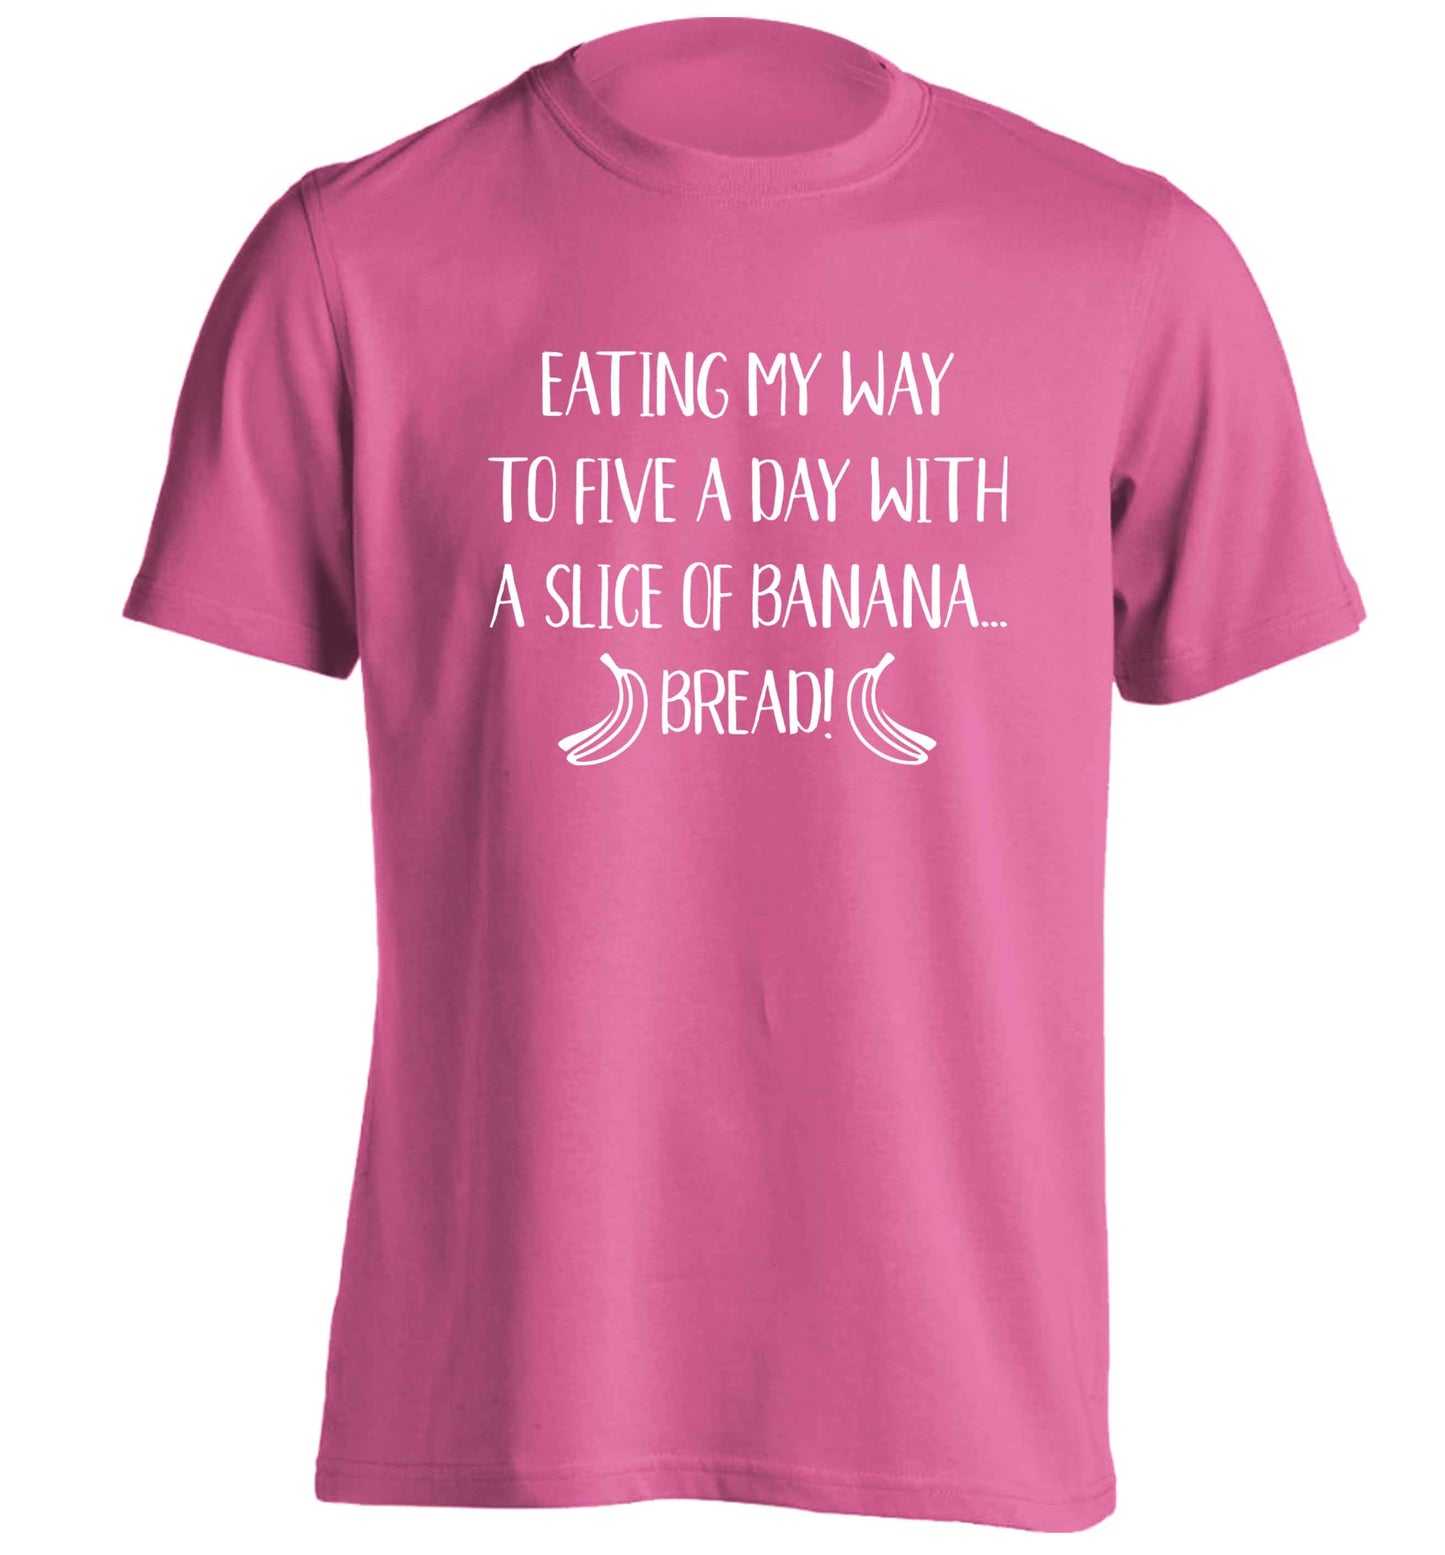 Eating my way to five a day with a slice of banana bread adults unisex pink Tshirt 2XL